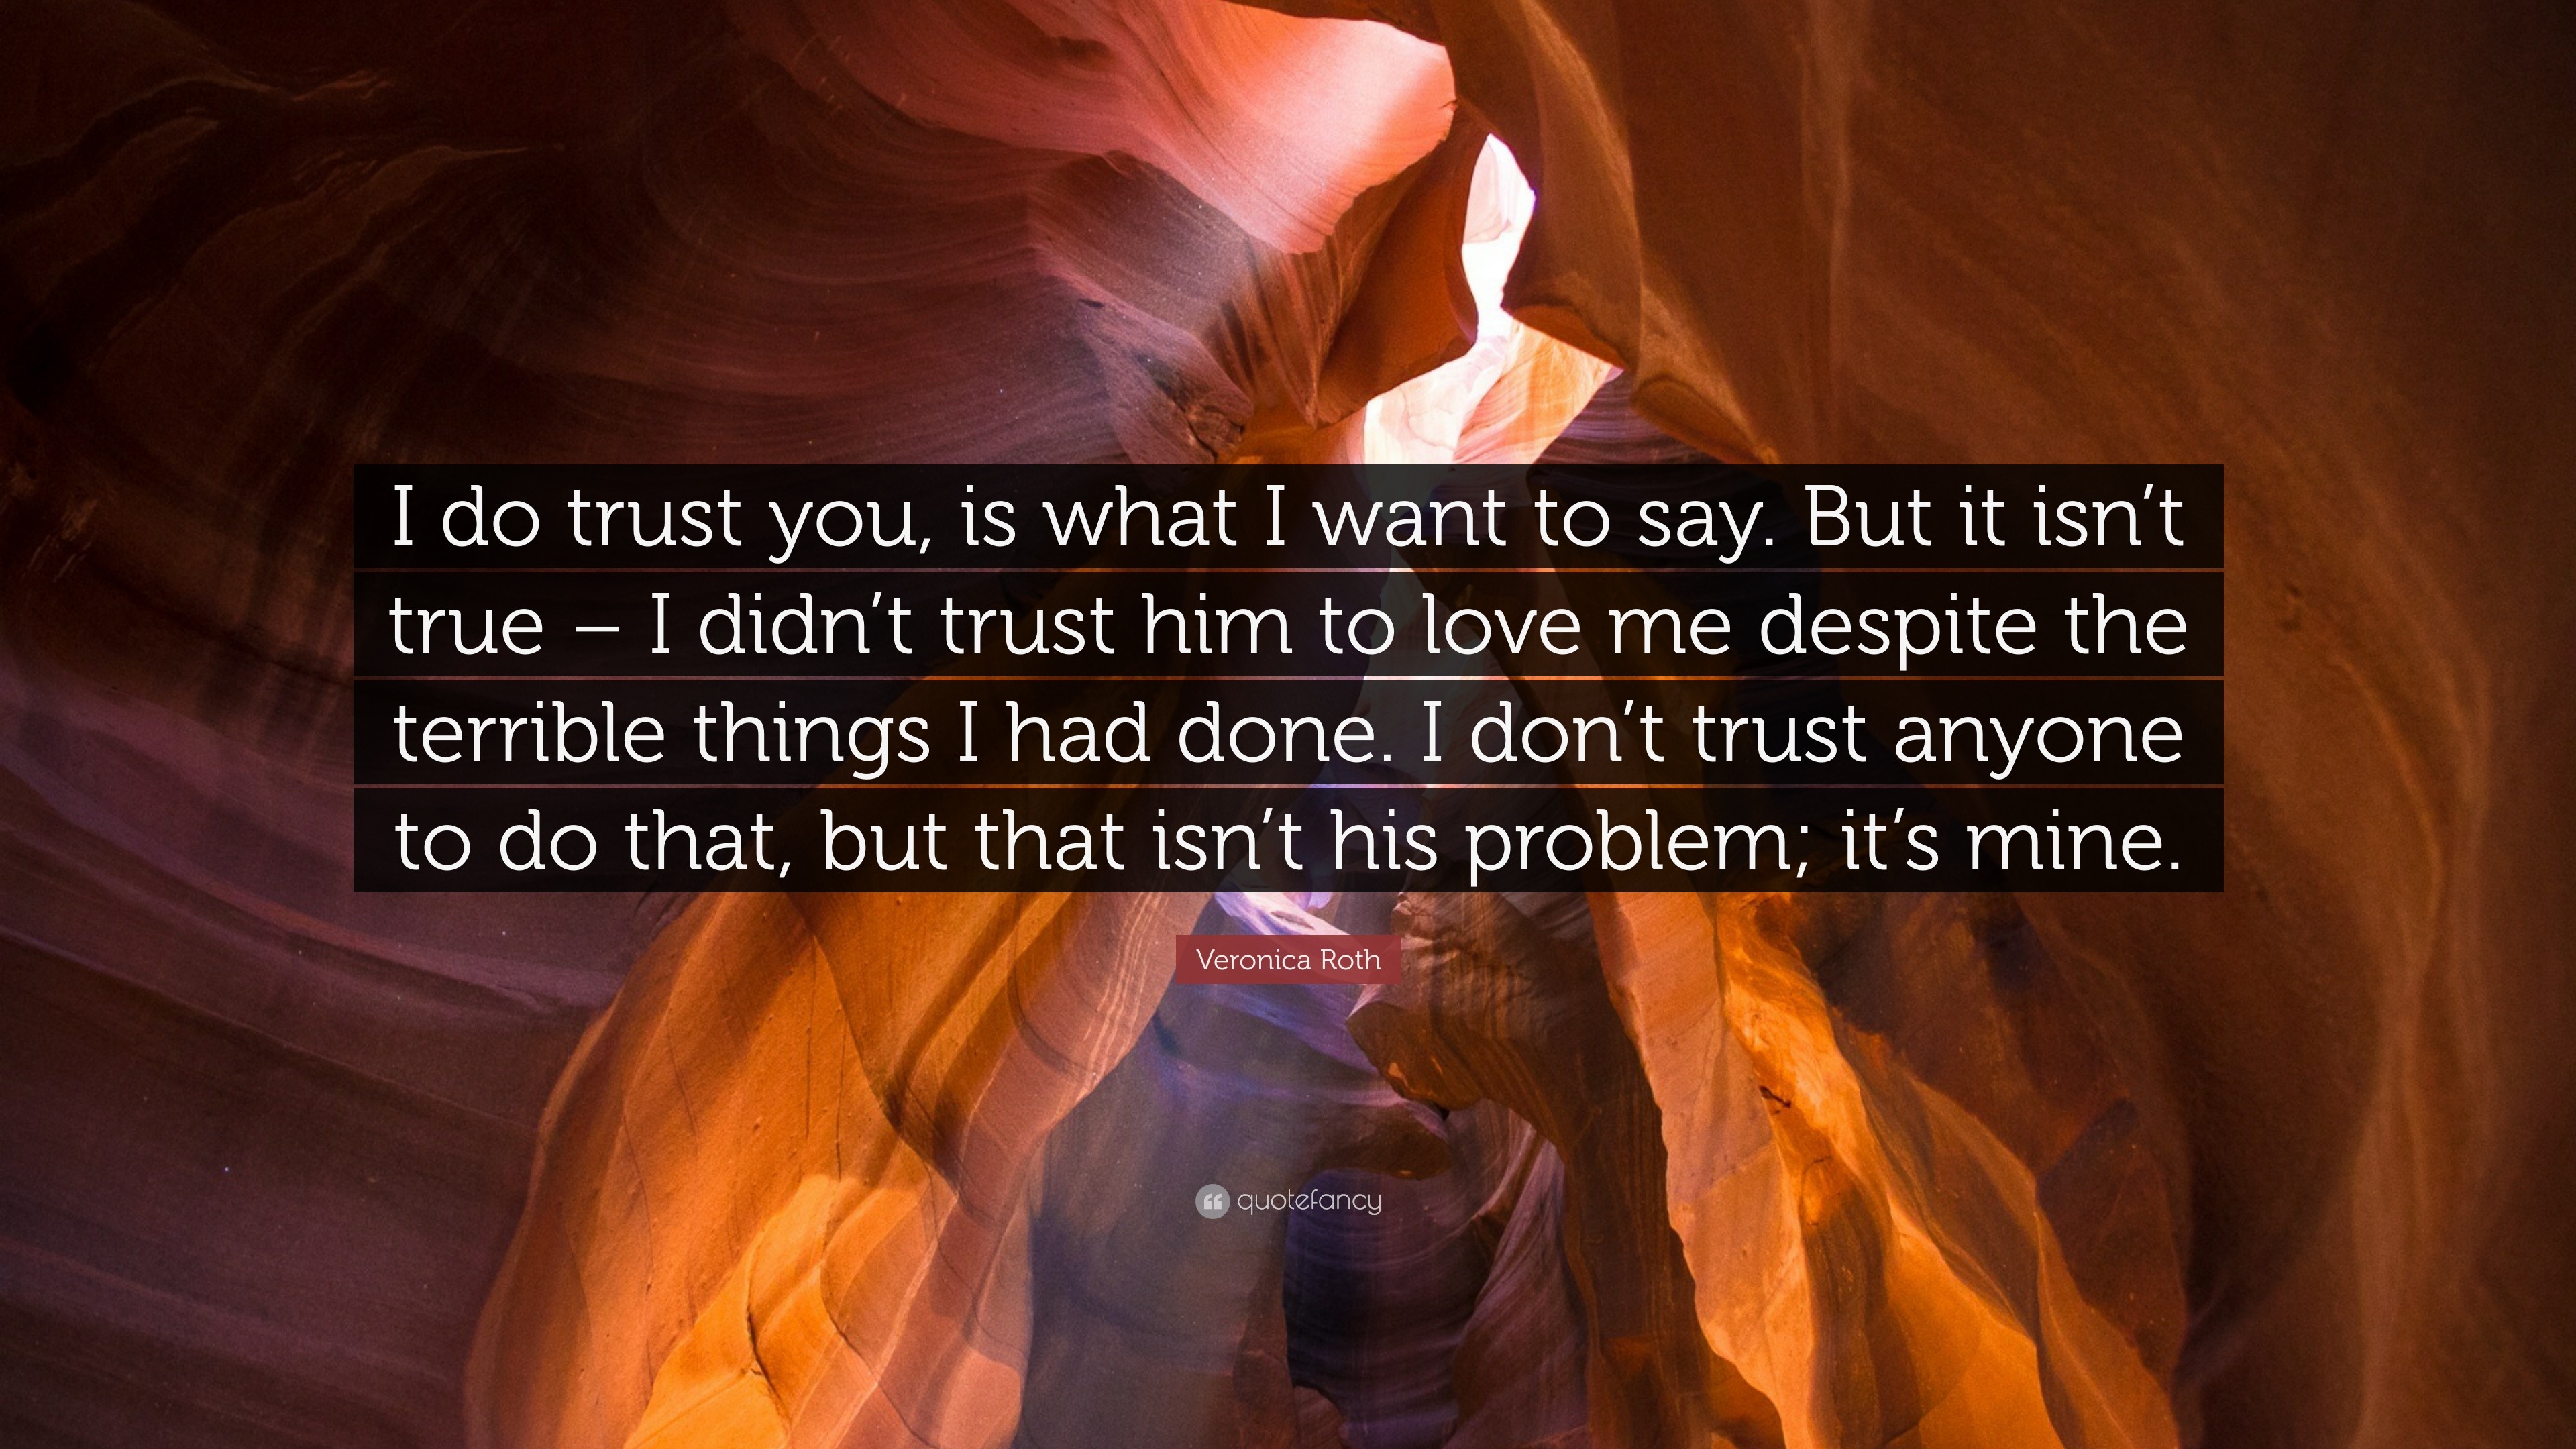 Veronica Roth Quote “I do trust you is what I want to say